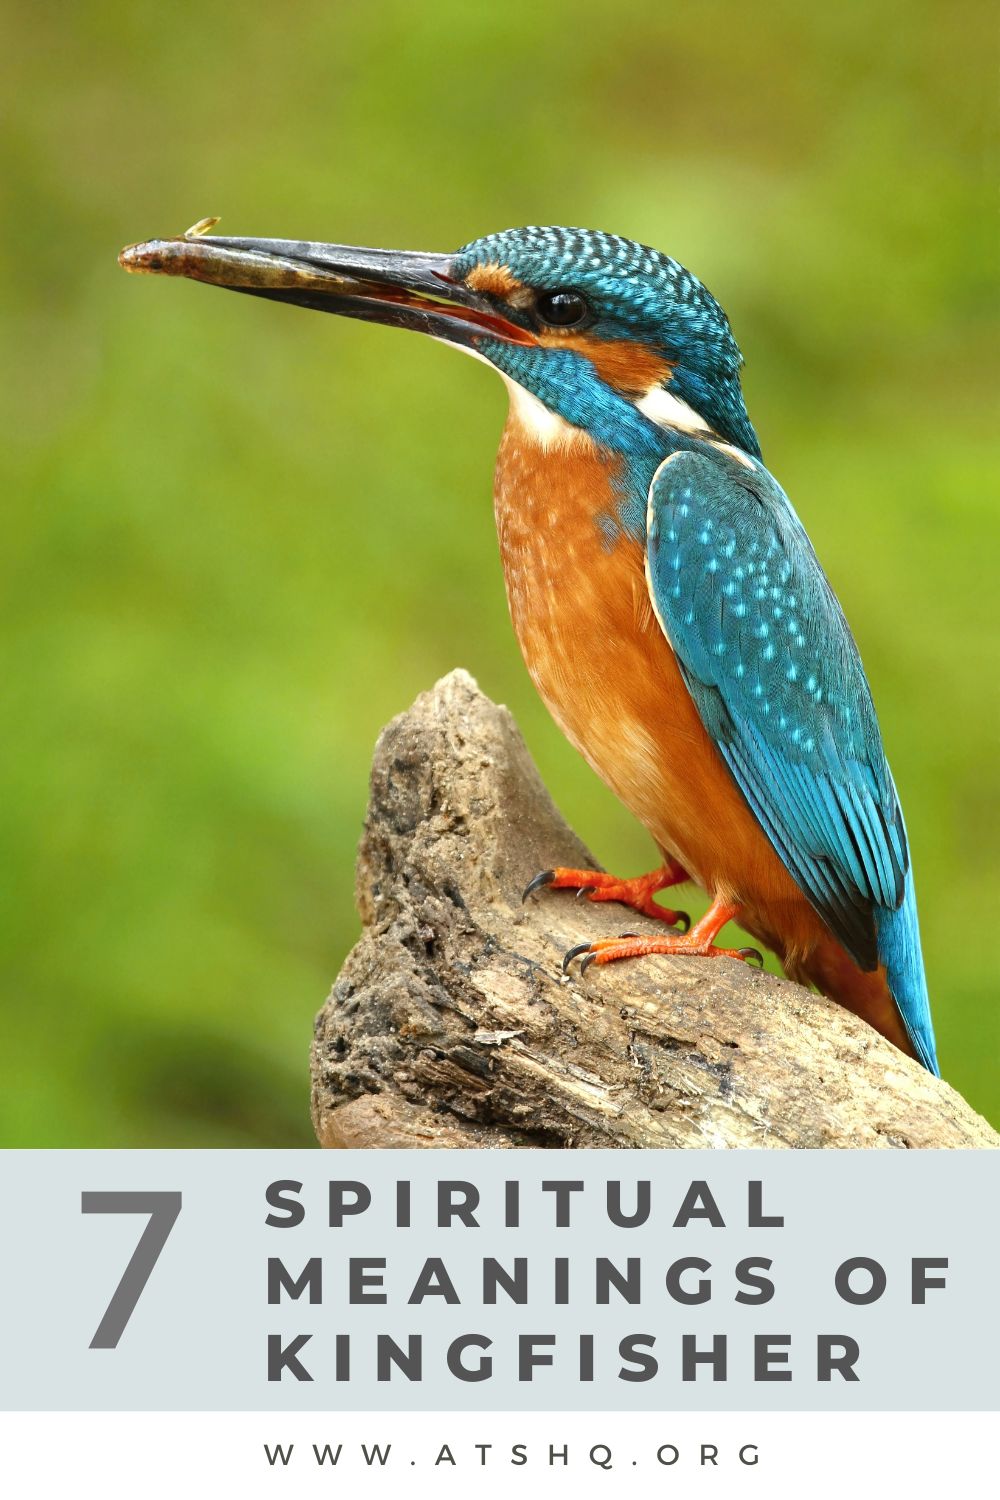 kingfisher Meanings